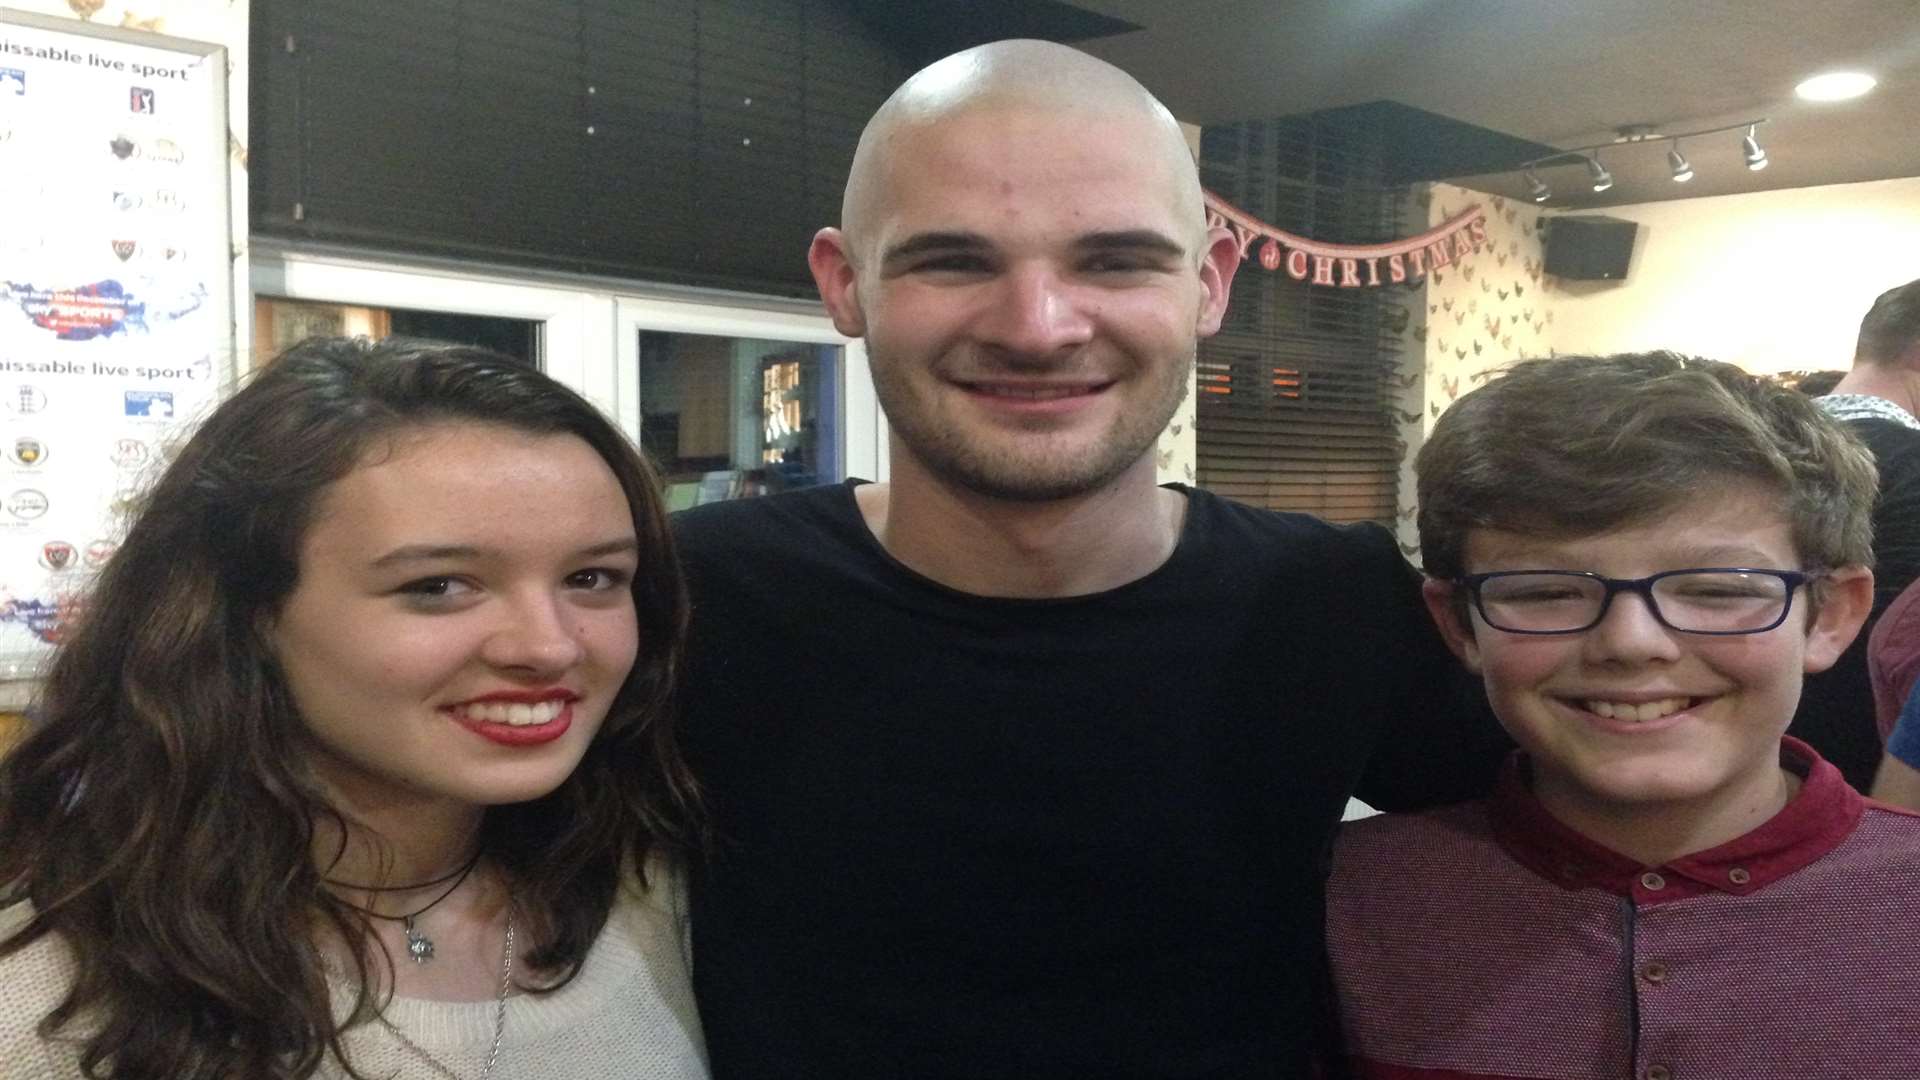 Jon Harris after the head shave with siblings Sarah and Daniel Colyer